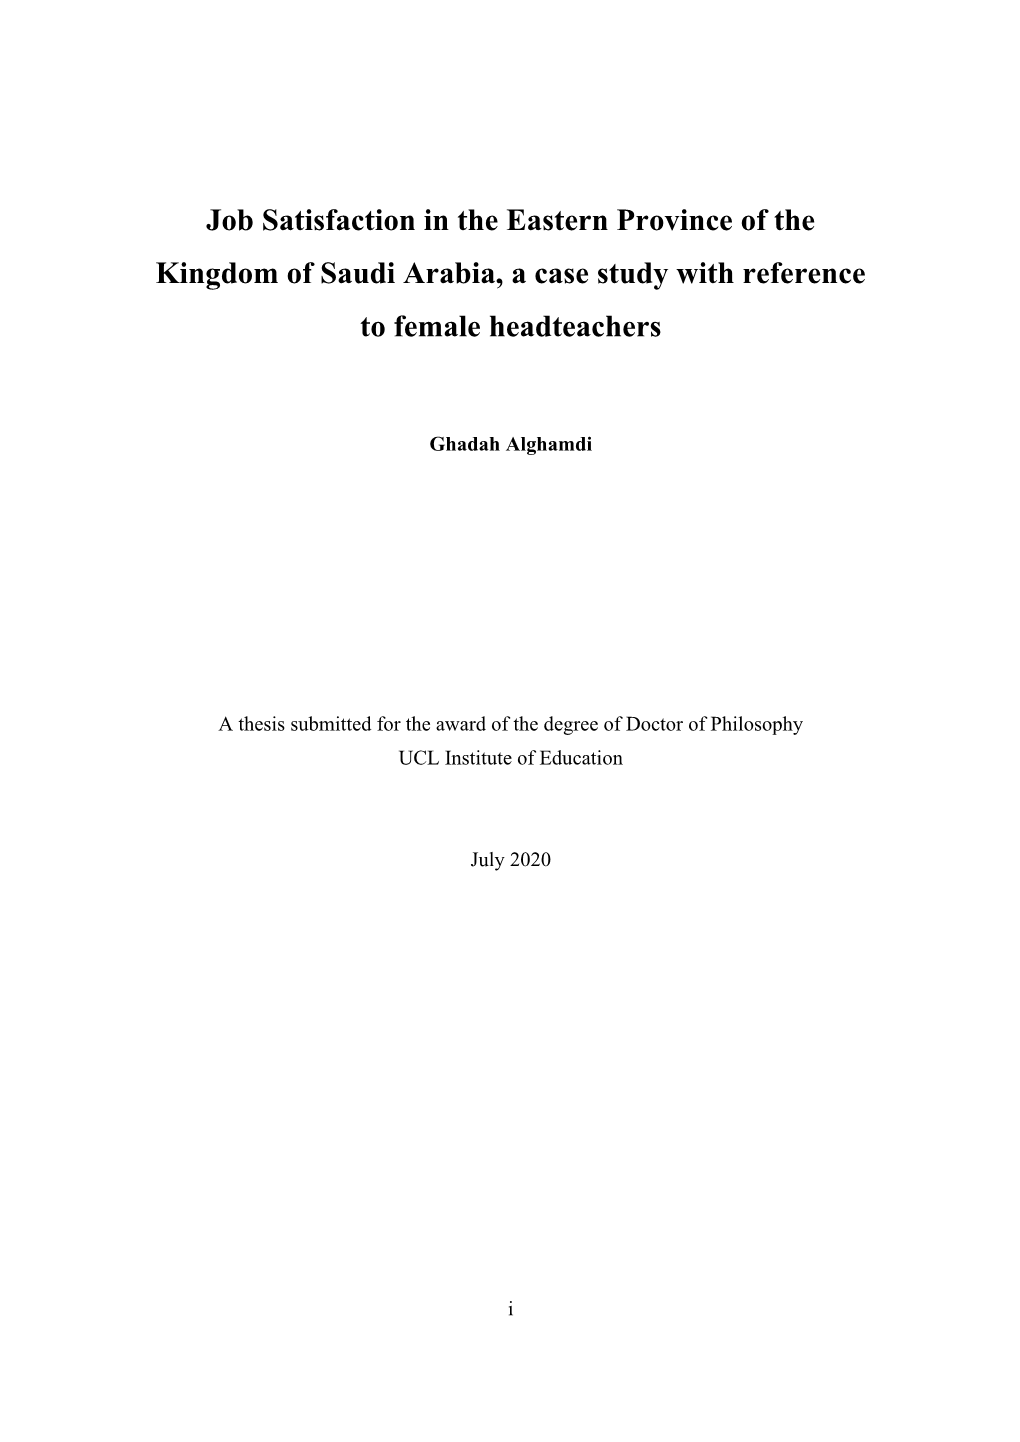 Job Satisfaction in the Eastern Province of the Kingdom of Saudi Arabia, a Case Study with Reference to Female Headteachers